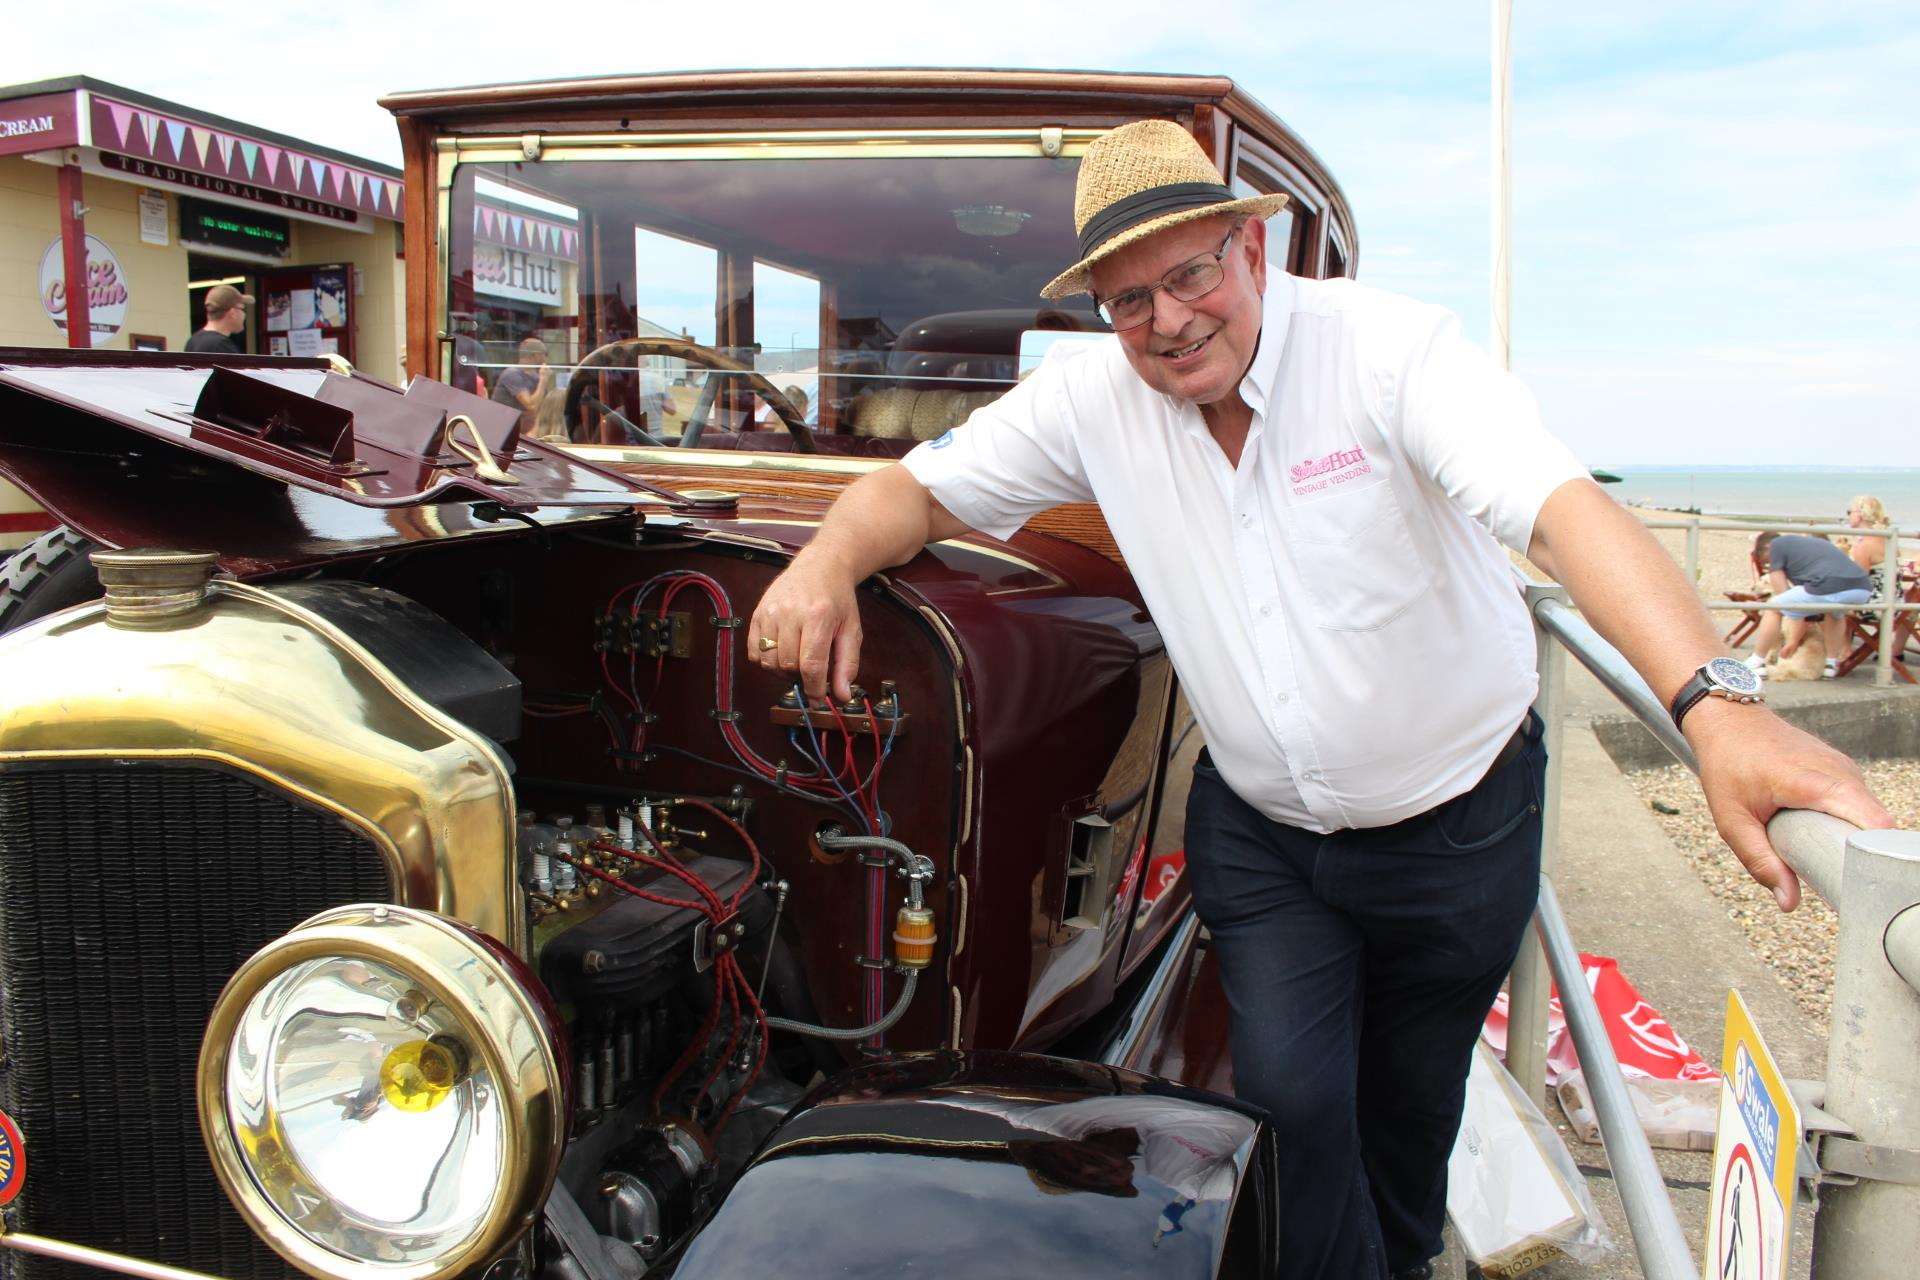 Car show organiser Paul Weeks with his pride and joy, a 1919 De Dion Bouton 3206600